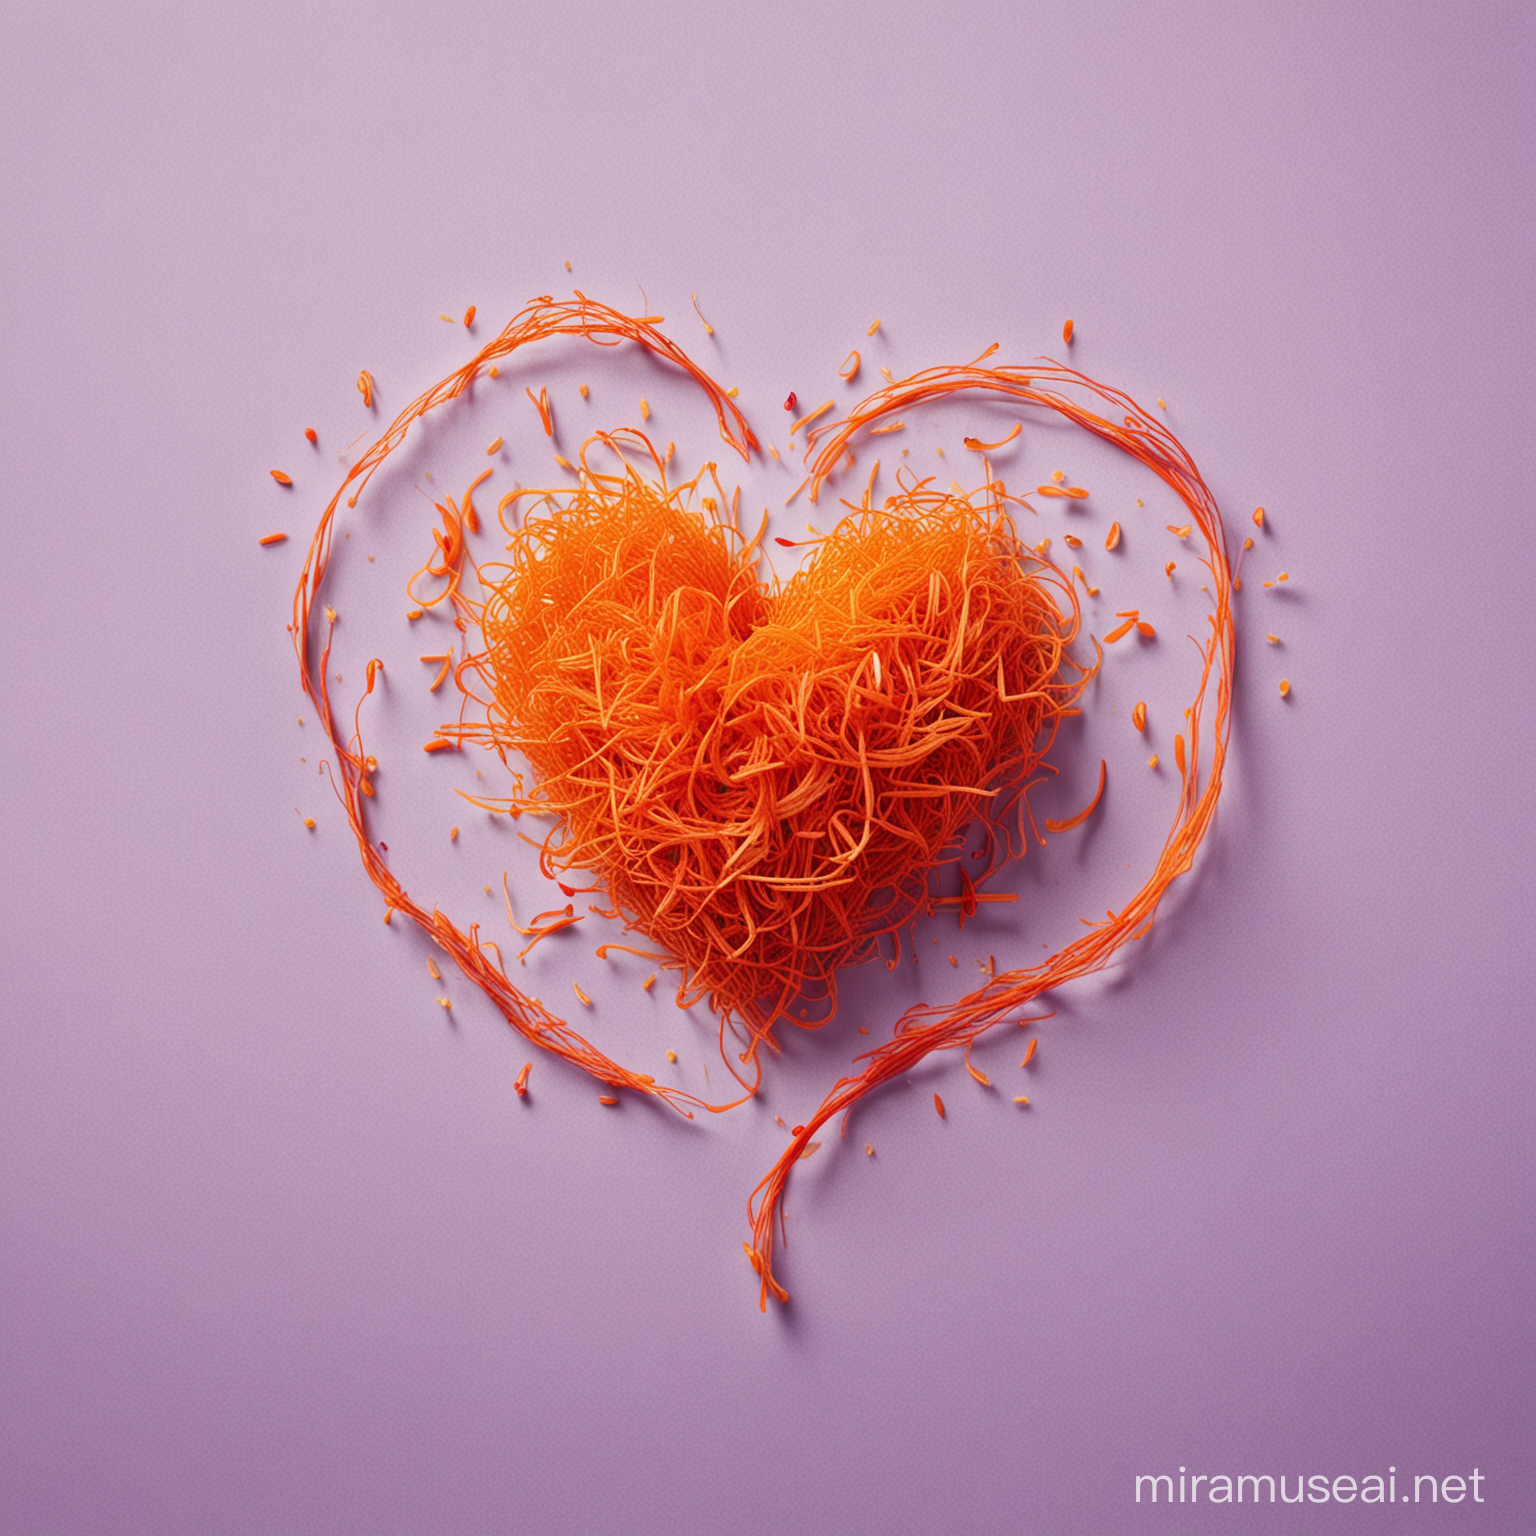 Here's a visual depicting saffron with its many wellness benefits:

**Center:**

* A pile of saffron threads, with a warm orange glow emanating from them.

**Surrounding the saffron:**

* Icons or illustrations representing various health benefits:
    * A happy face for mood improvement
    * A strong heart for heart health
    * A brain for cognitive function
    * A shield for immune system support
    * A cellular structure for antioxidant properties
    * A drop of water for hydration

**Background:**

* A soft, natural background in calming colors like light green or lavender.

This image combines the visual appeal of saffron with clear symbols to represent its diverse wellness benefits. 